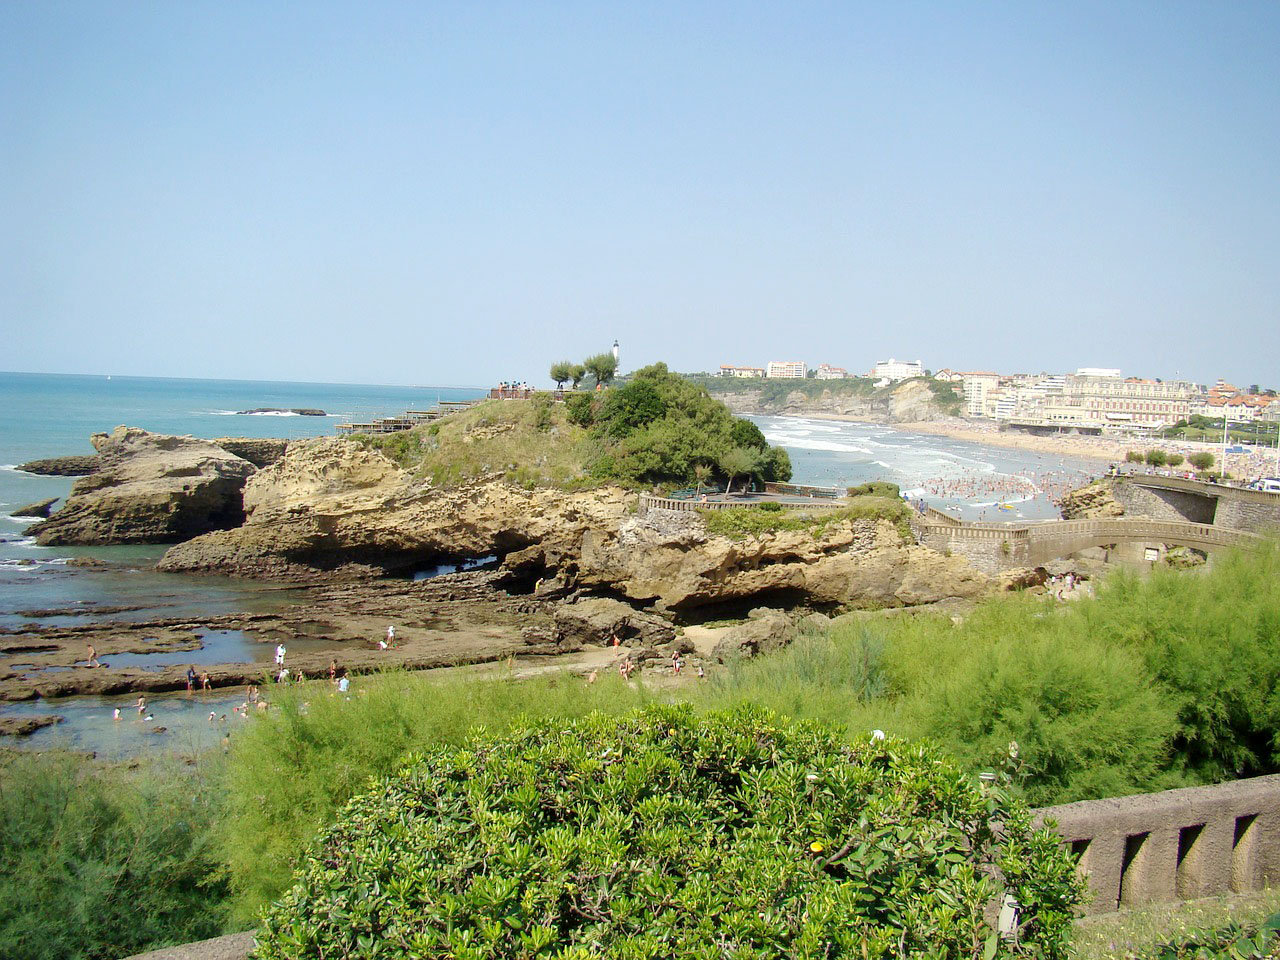 Top 10 things to do in Biarritz, France